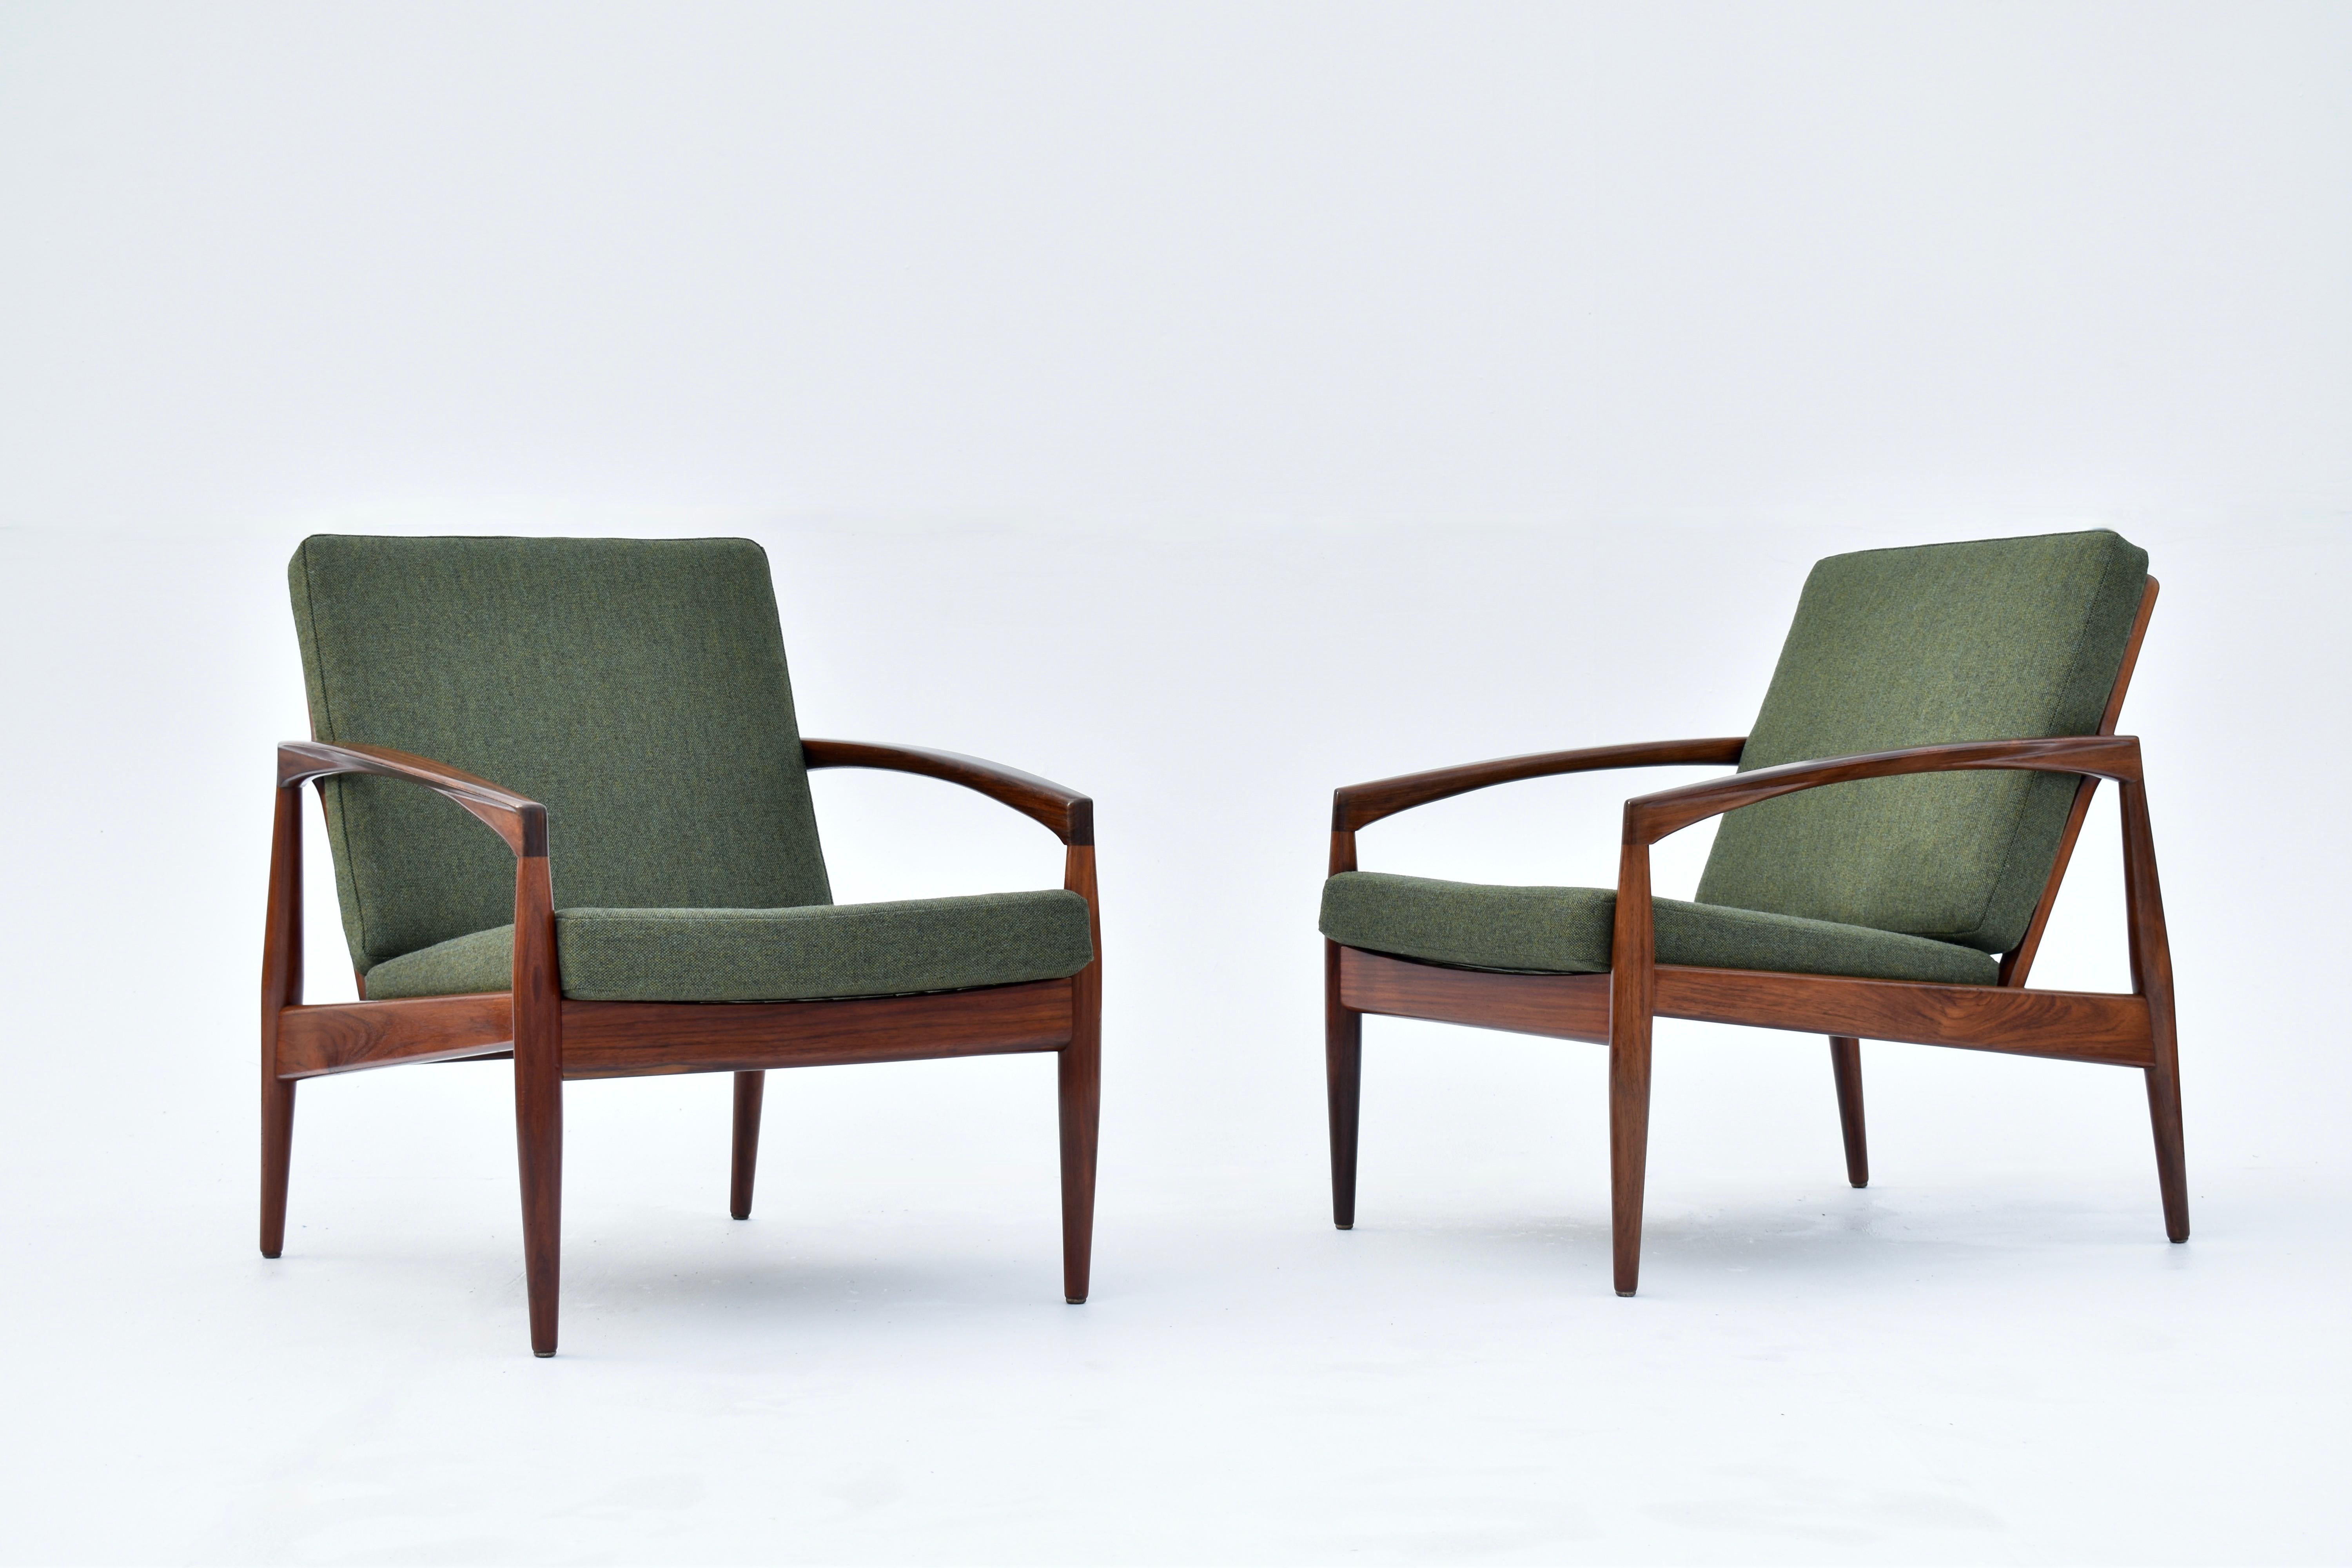 Perhaps Kai Kristiansen’s most celebrated design and a bona fide Danish design classic.

A hard to find original pair of ‘Paper knife’ chairs crafted from solid rosewood. One of the most graceful and beautiful chairs of the Danish Modern